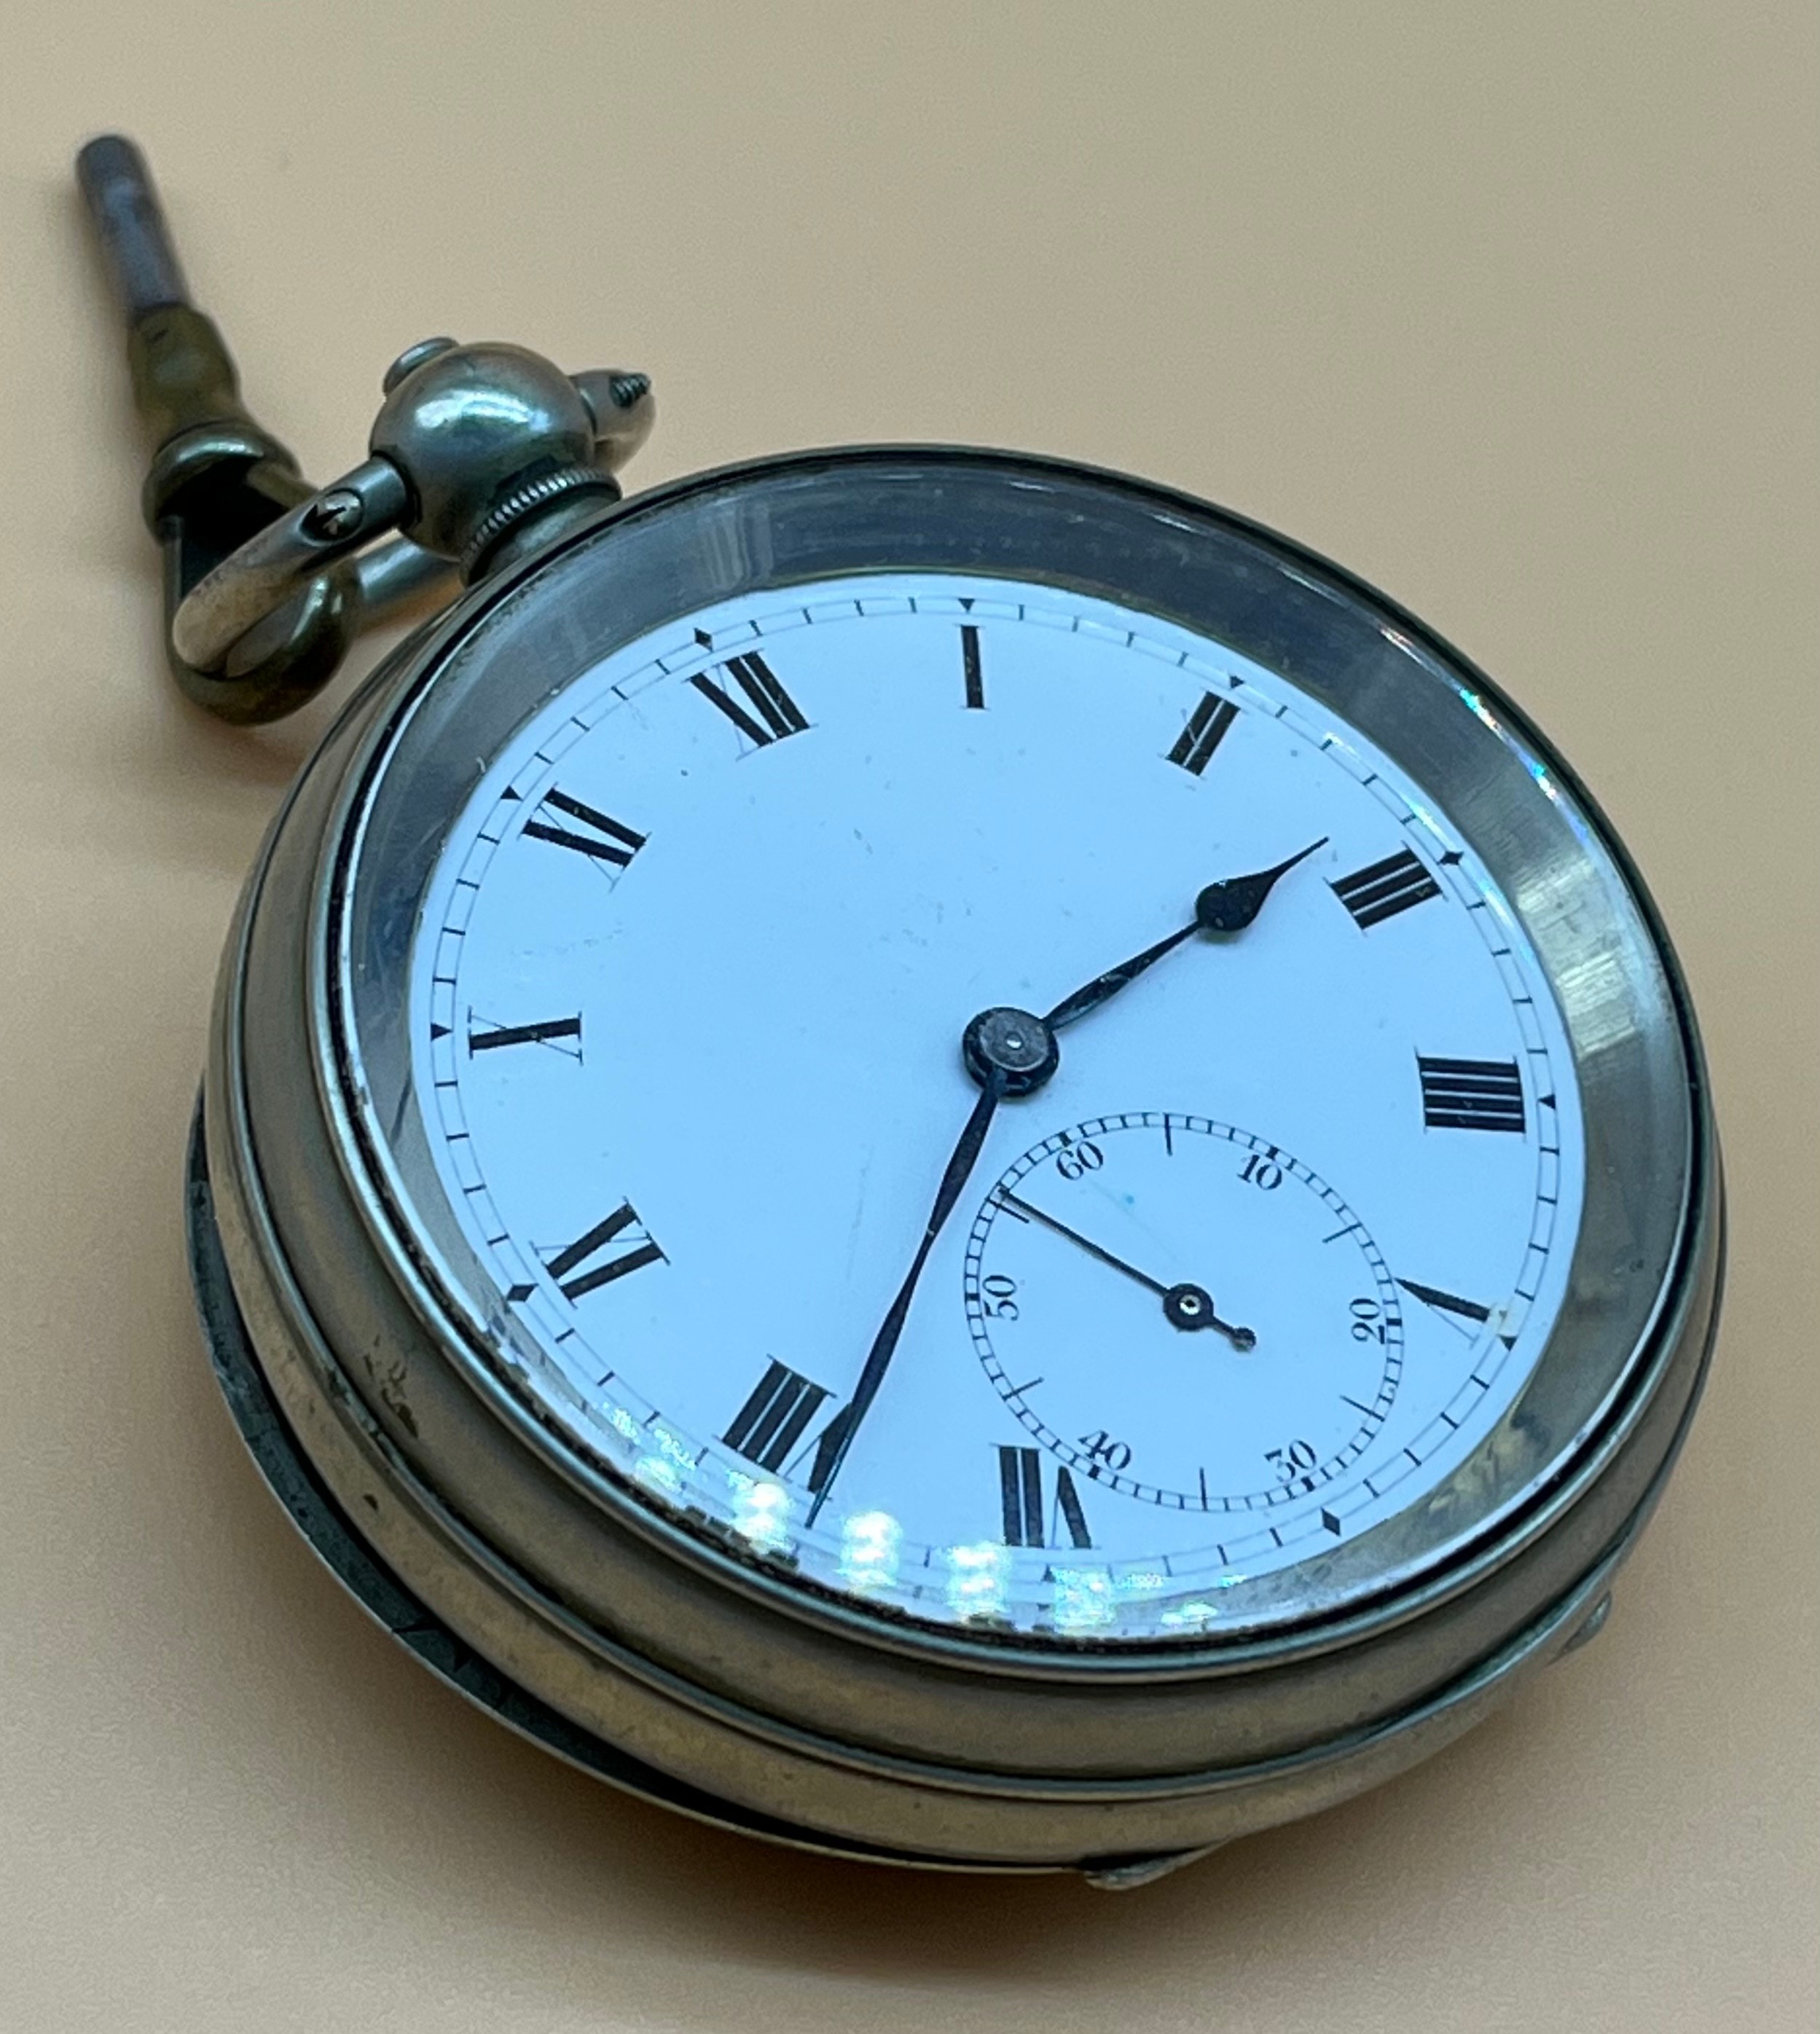 Antique pocket watch fitted within a nickel case, Enamel face. Swiss made New Magnetic. Comes with a